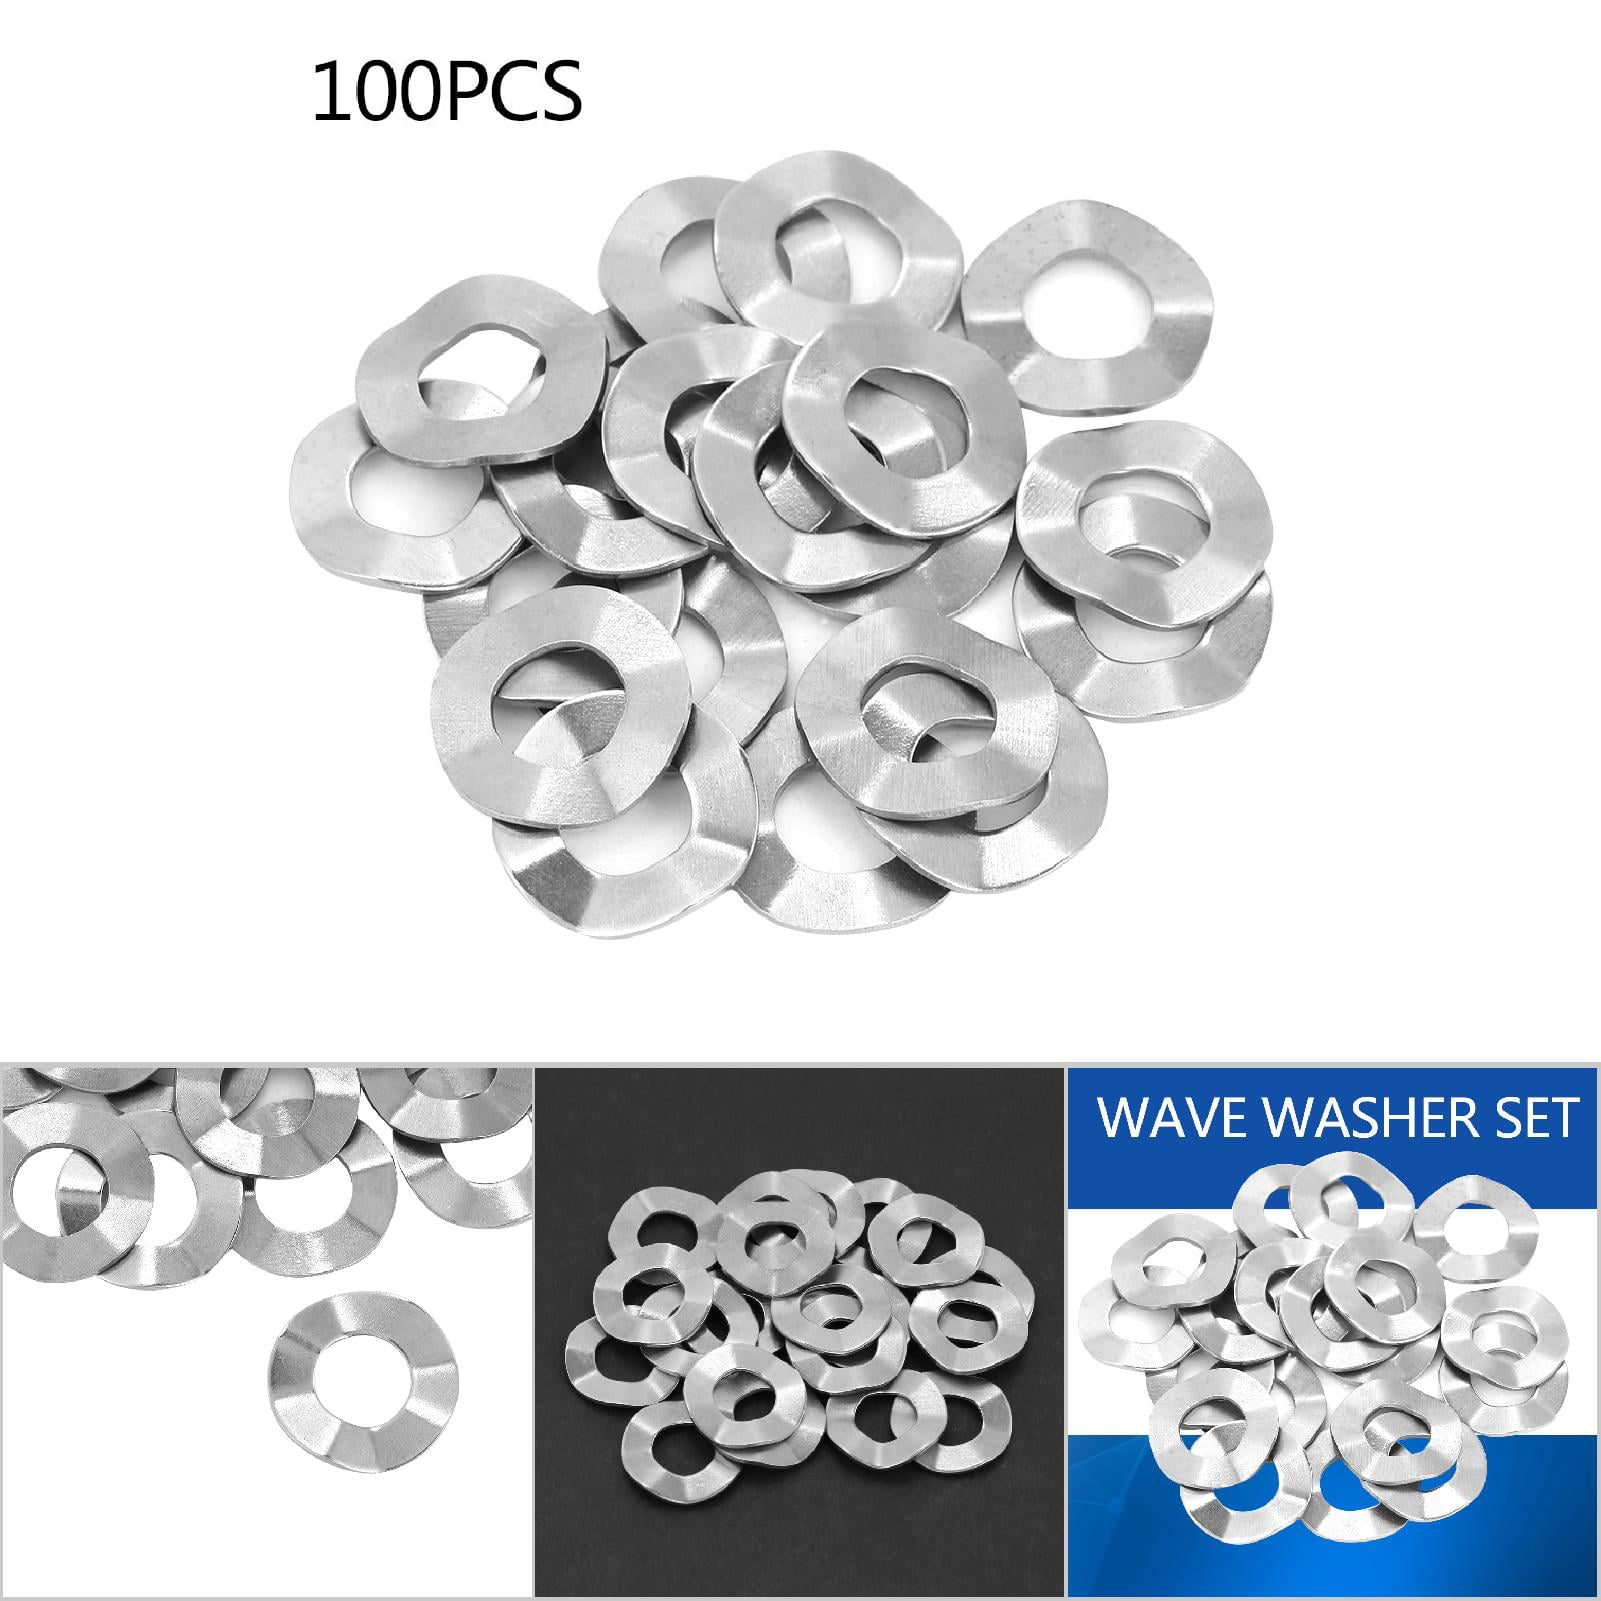 Stainless Steel Wave Washer Gasket Spring Washers Lock Tools Set wtt 